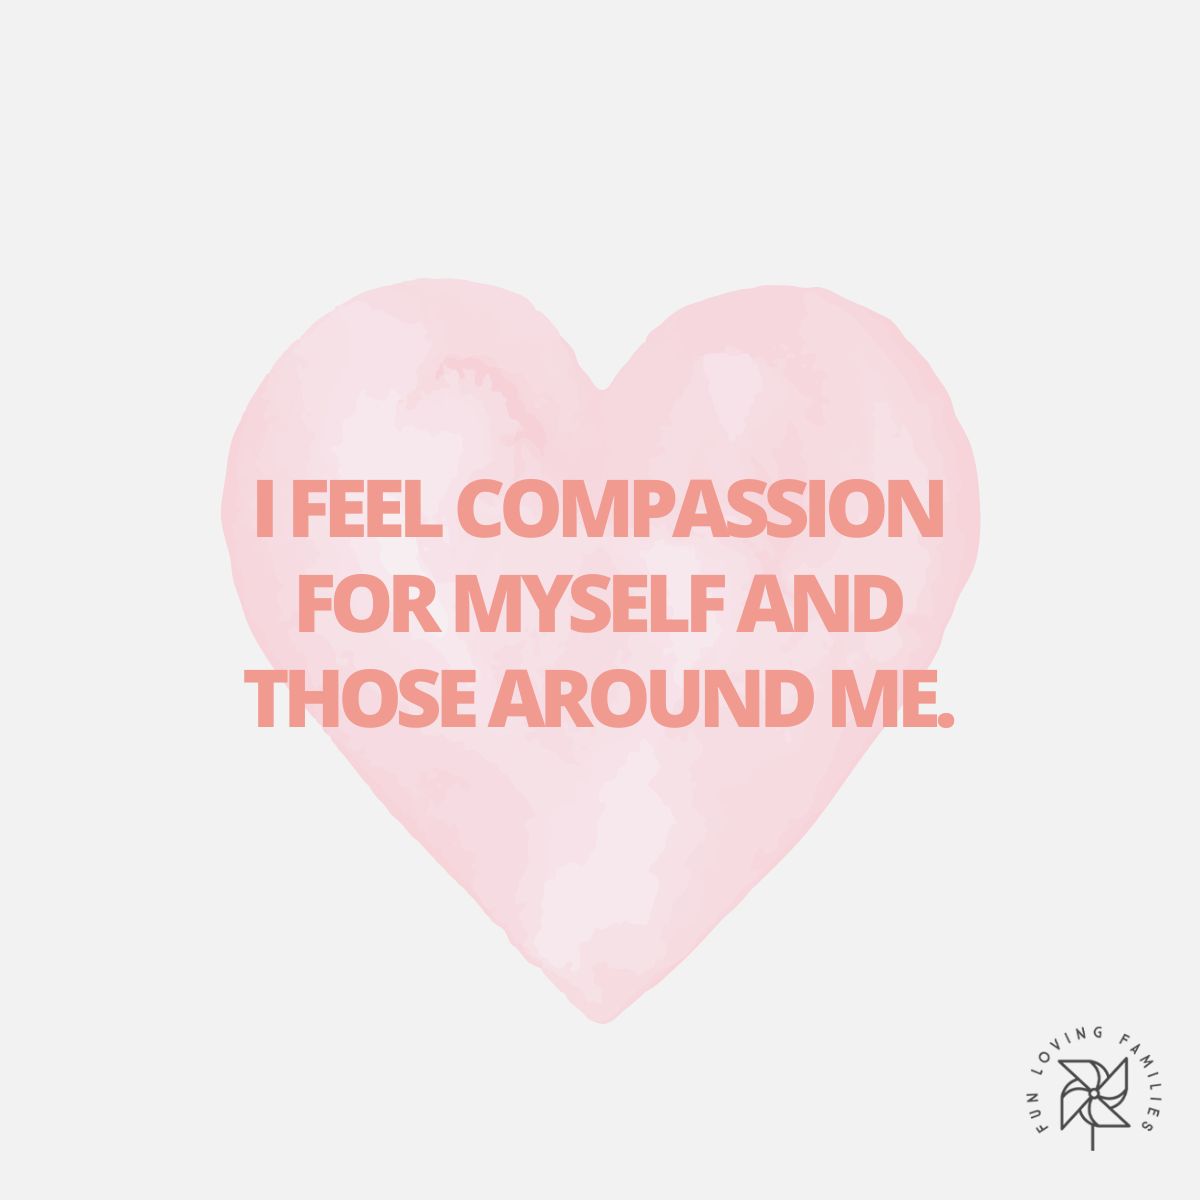 I feel compassion for myself and those around me affirmation